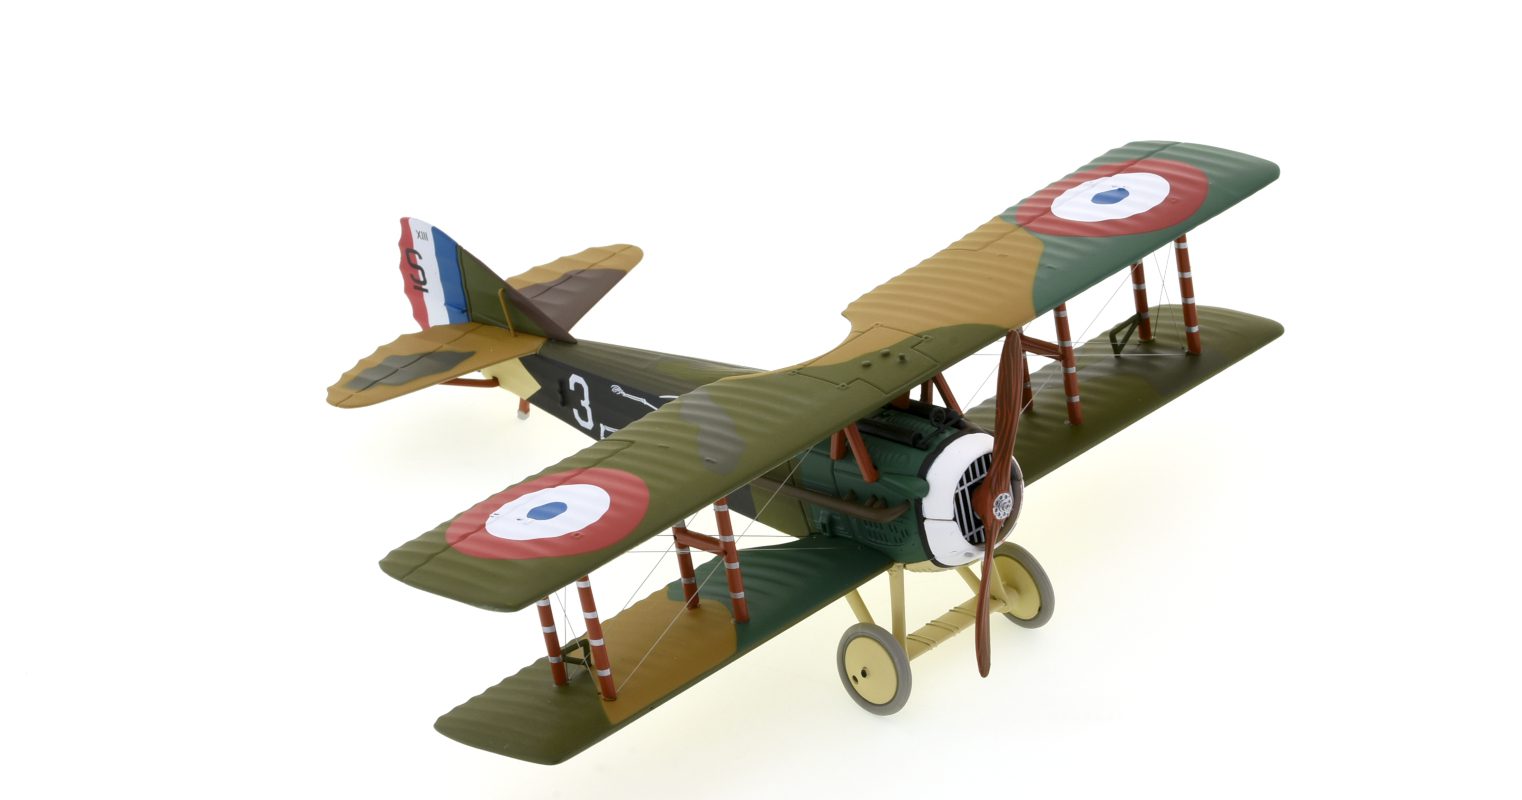 Front starboard side view of the 1/48 scale SPAD S.XIII diecast model of 